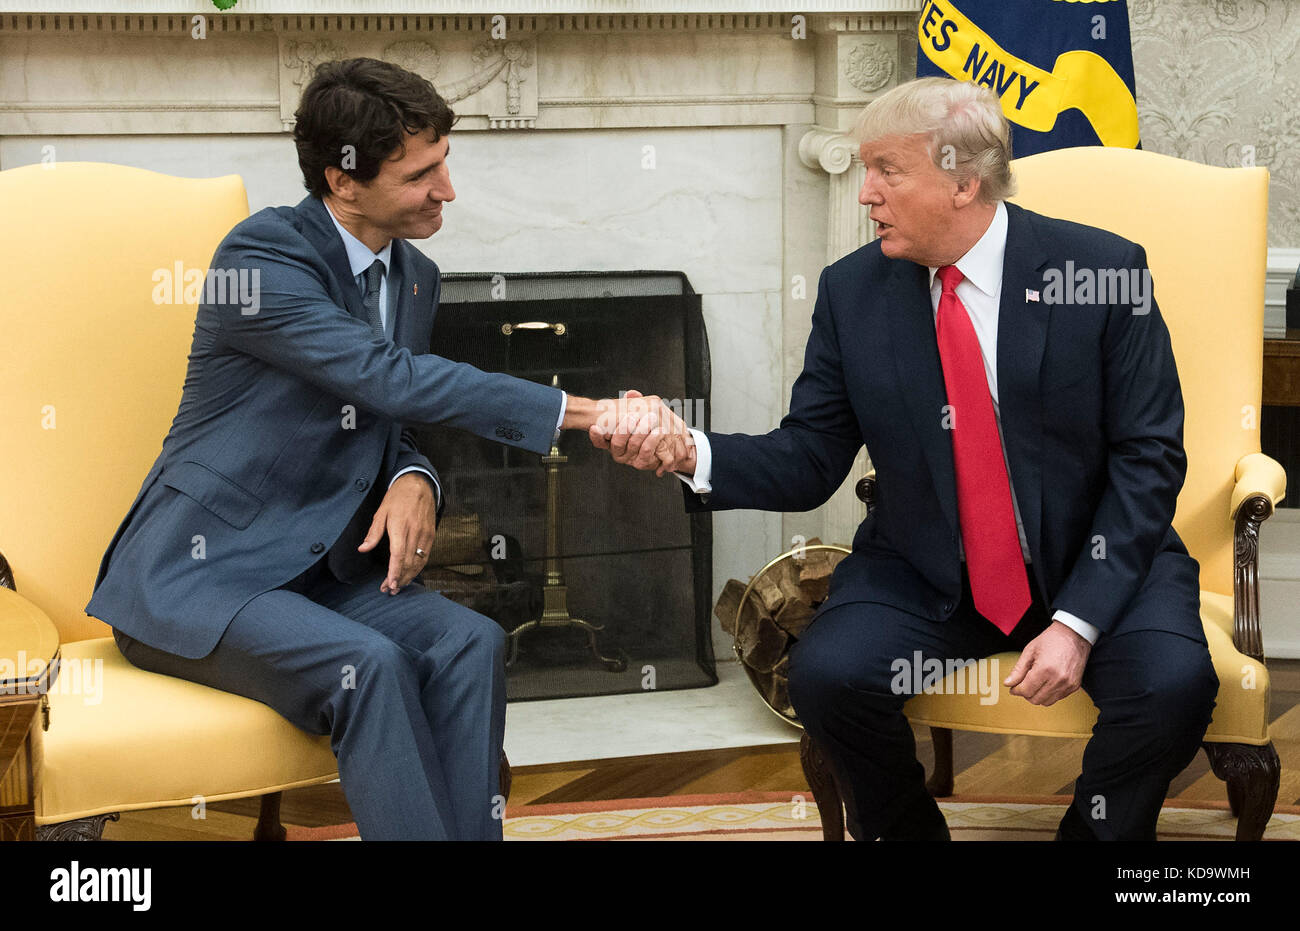 Washington DC, USA. 11th Oct, 2017. United States President Donald Trump shakes hands with Canadian Prime Minister Justin Trudeau during a meeting in the Oval Office at the White House in Washington, DC on October 11, 2017. Credit: Kevin Dietsch/Pool via CNP /MediaPunch Credit: MediaPunch Inc/Alamy Live News Stock Photo